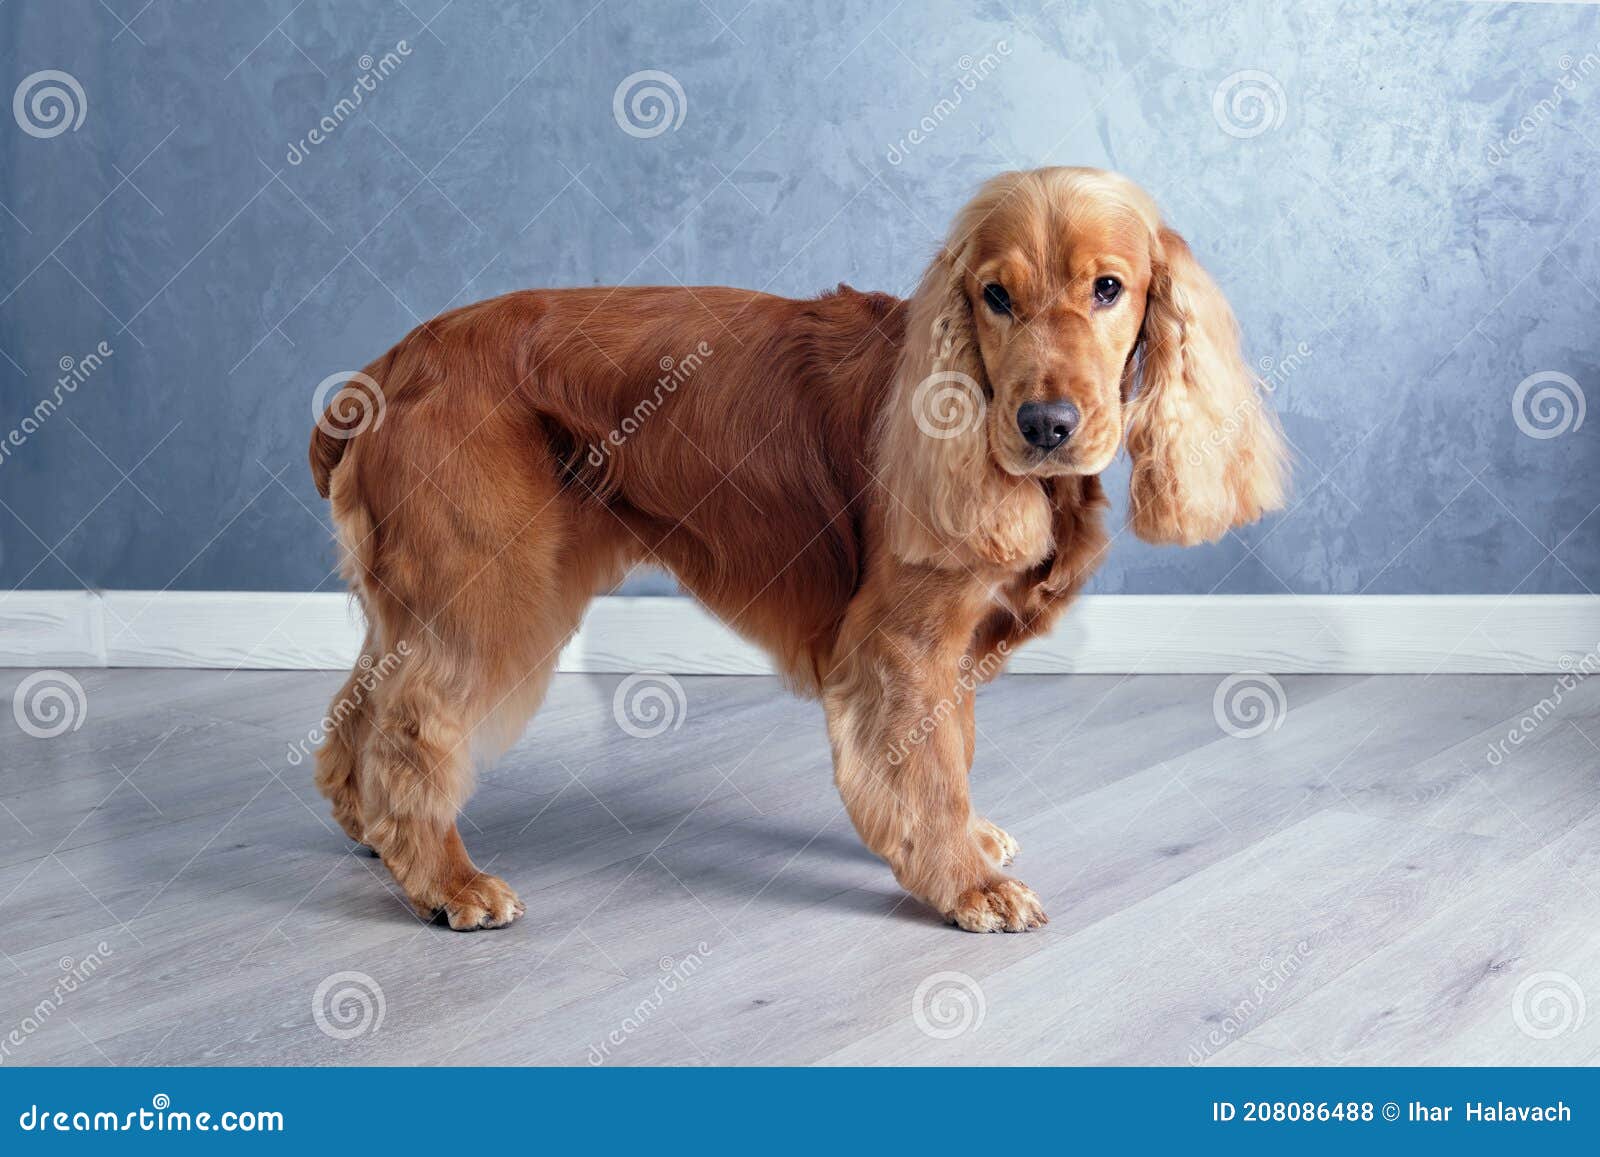 Undtagelse forsætlig Gud English Cocker Spaniel Stands on a Gray Background Close-up. Stock Photo -  Image of brown, domestic: 208086488